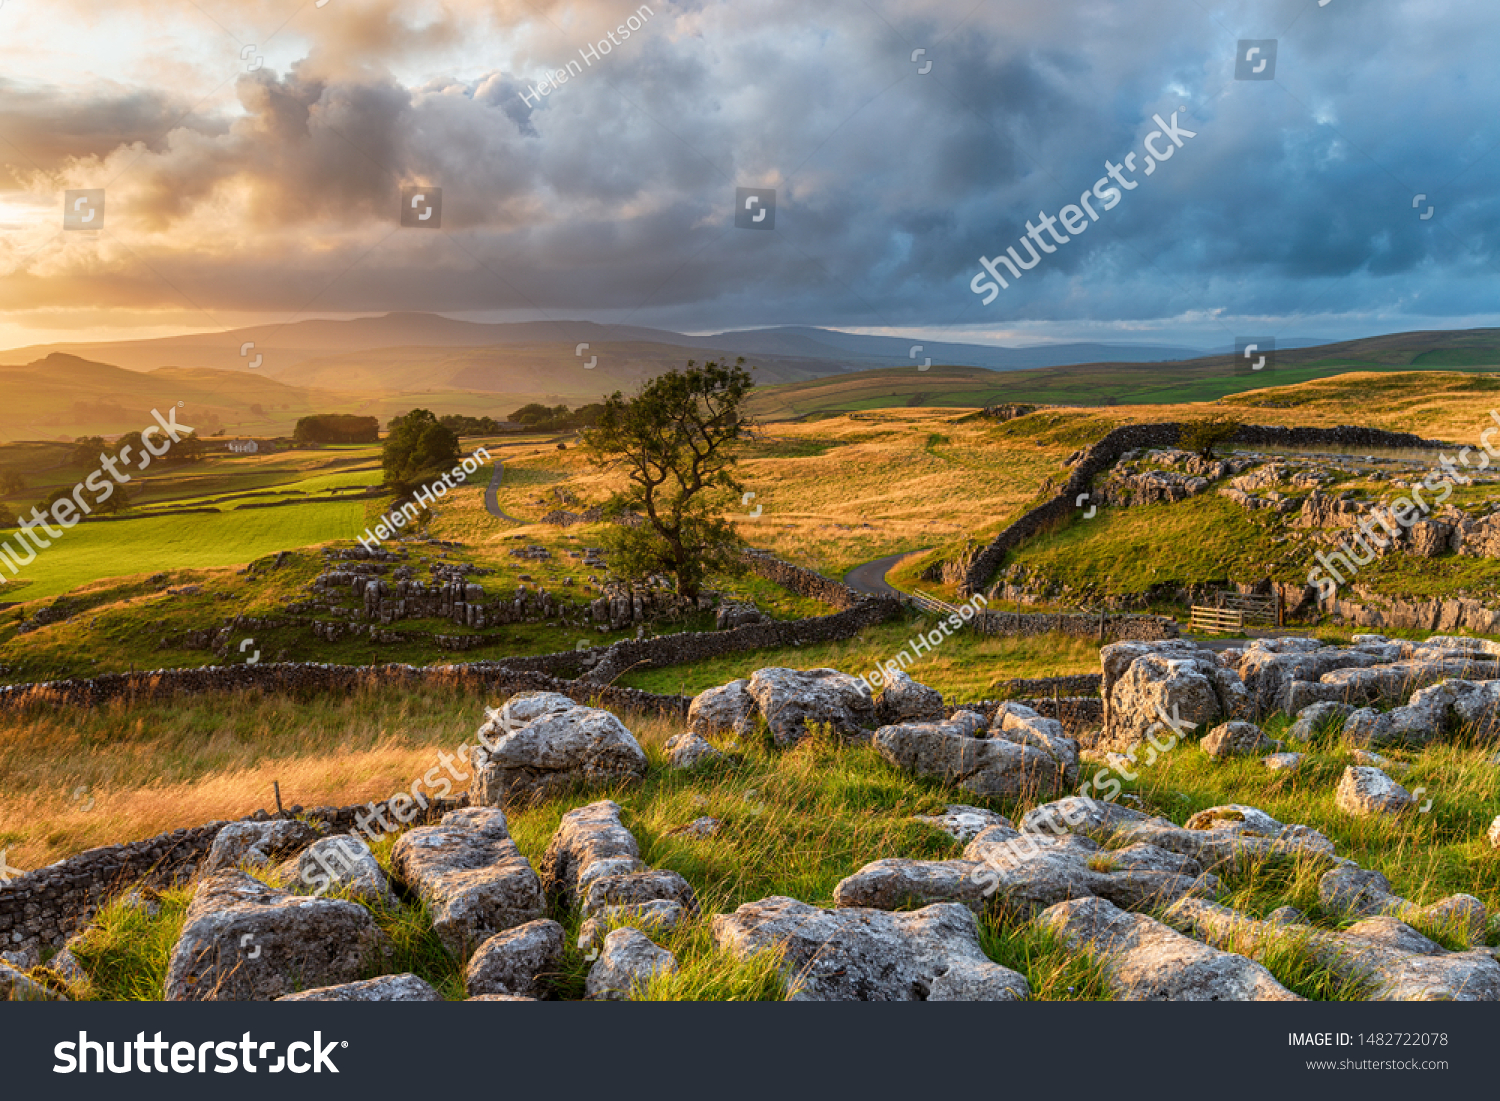 Sunset at the Winskill Stones near Settle in the Yorkshire Dales National Park #1482722078